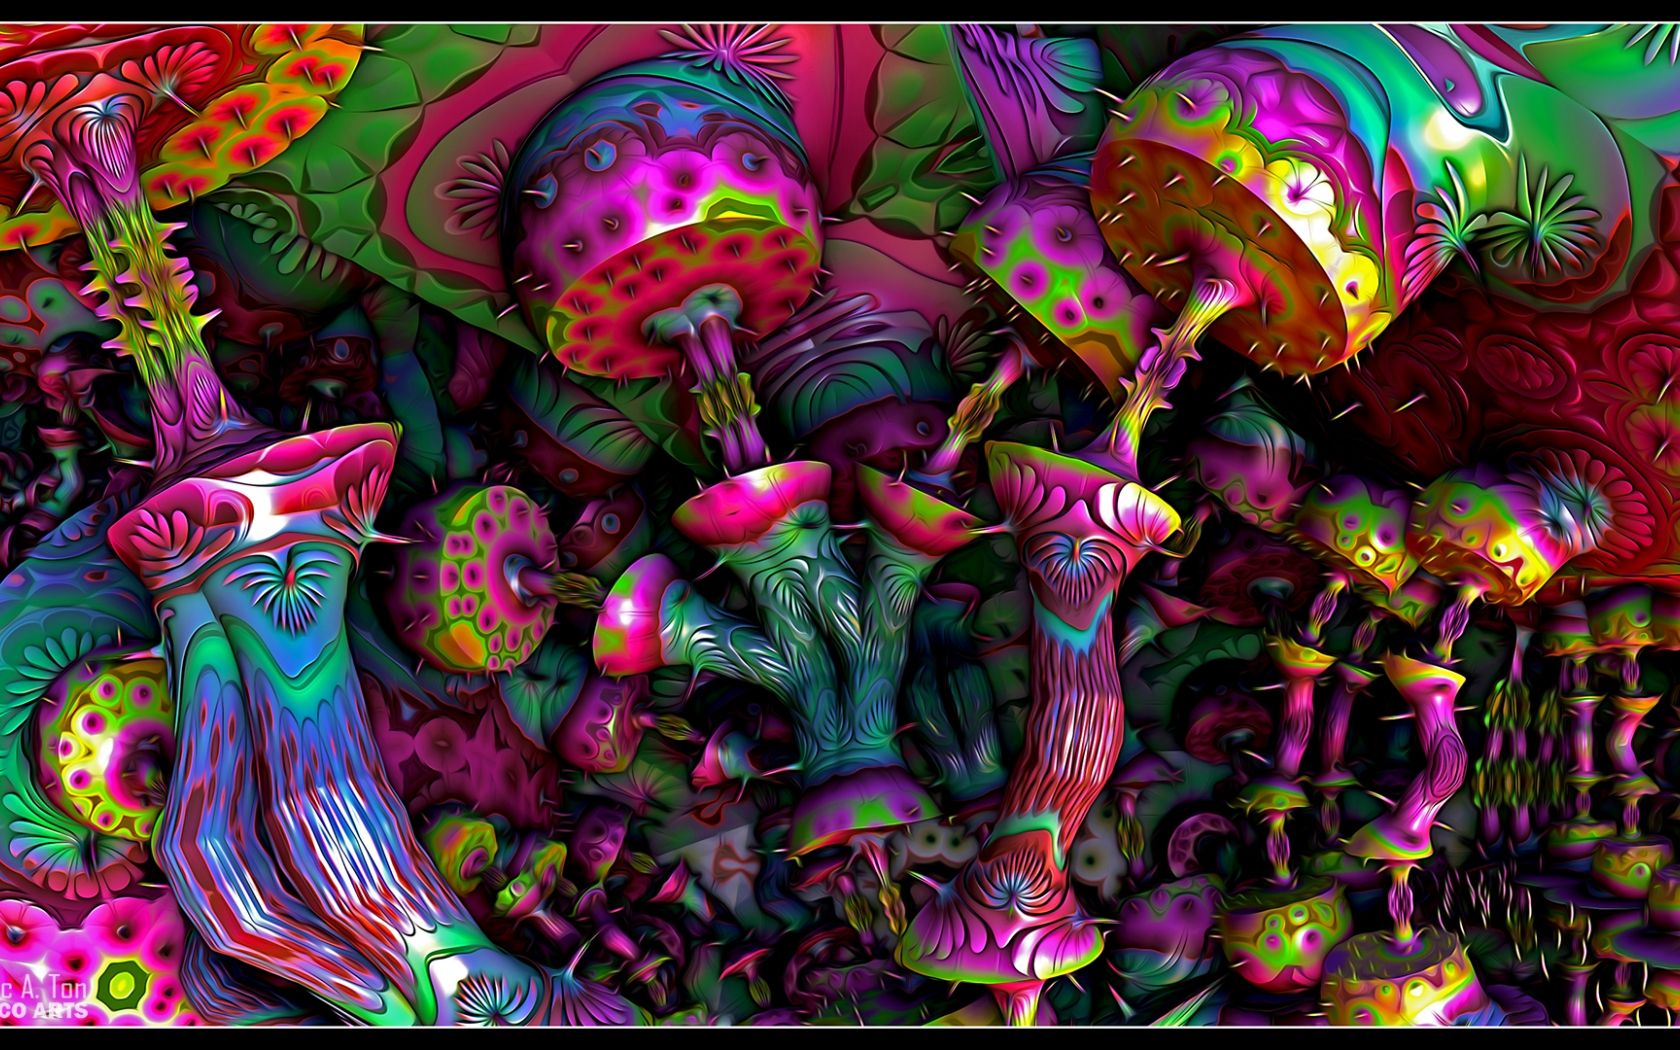 Free download Psychedelic Mushrooms by eccoarts [1920x1080]